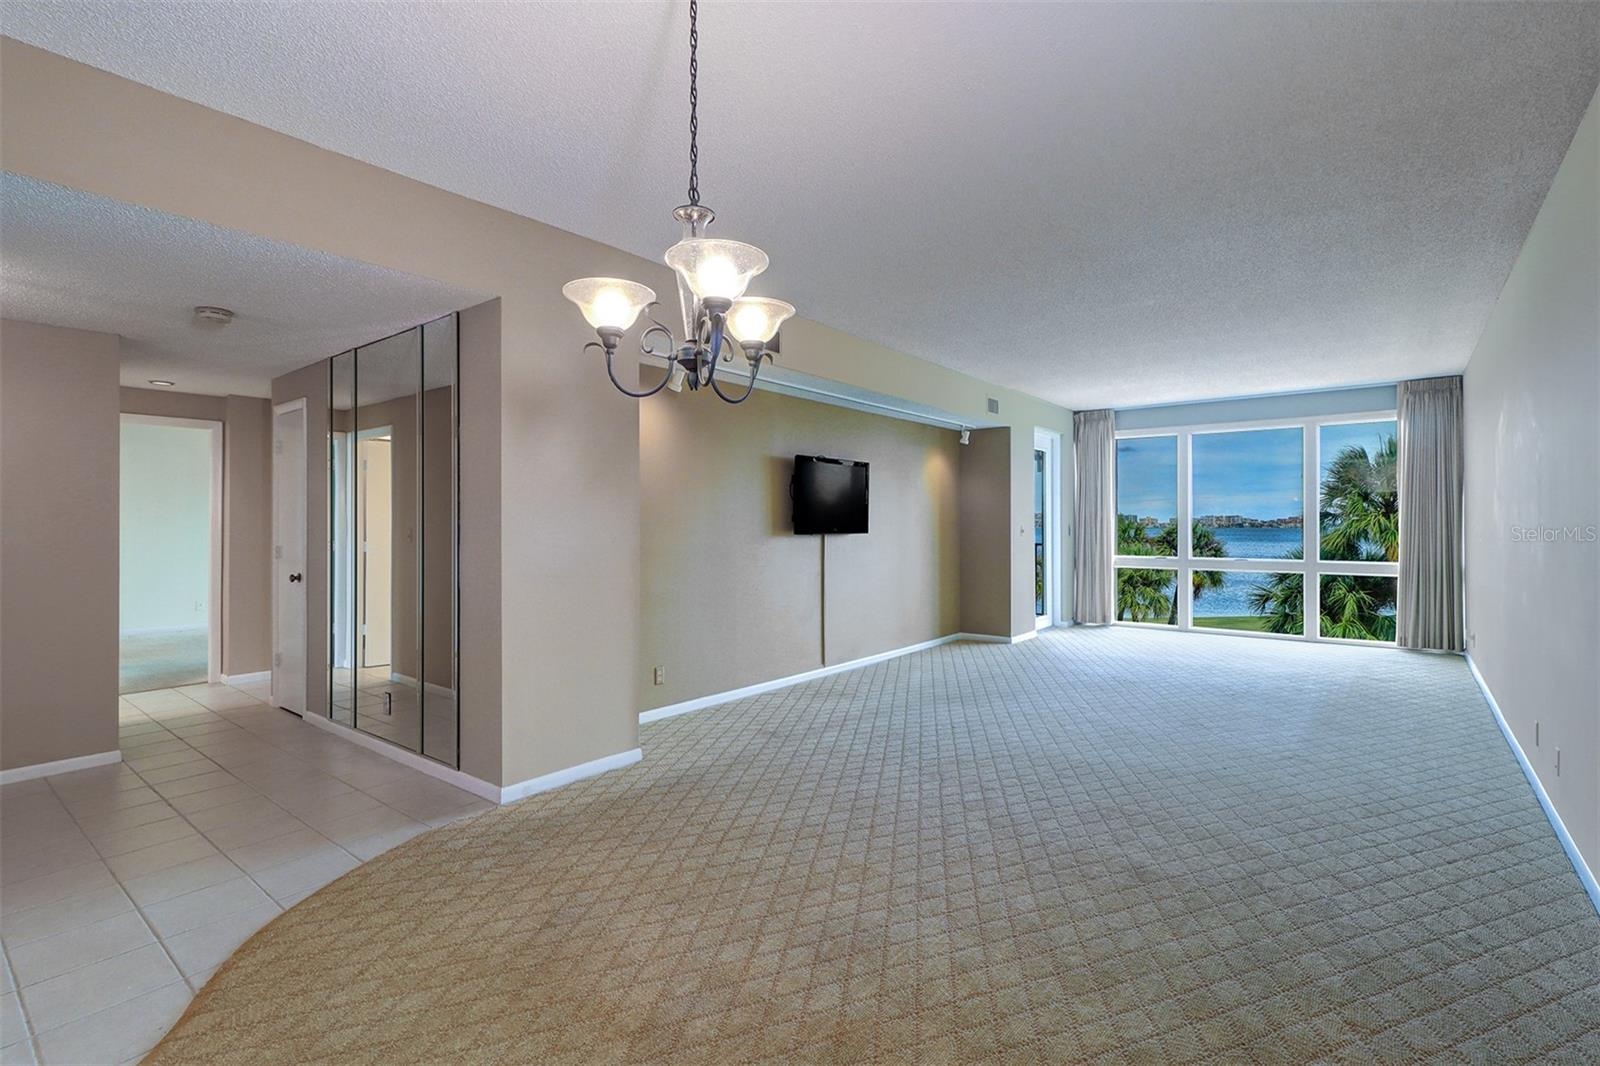 View of entry hall to the left, dining and living area to the full glass wall of water views